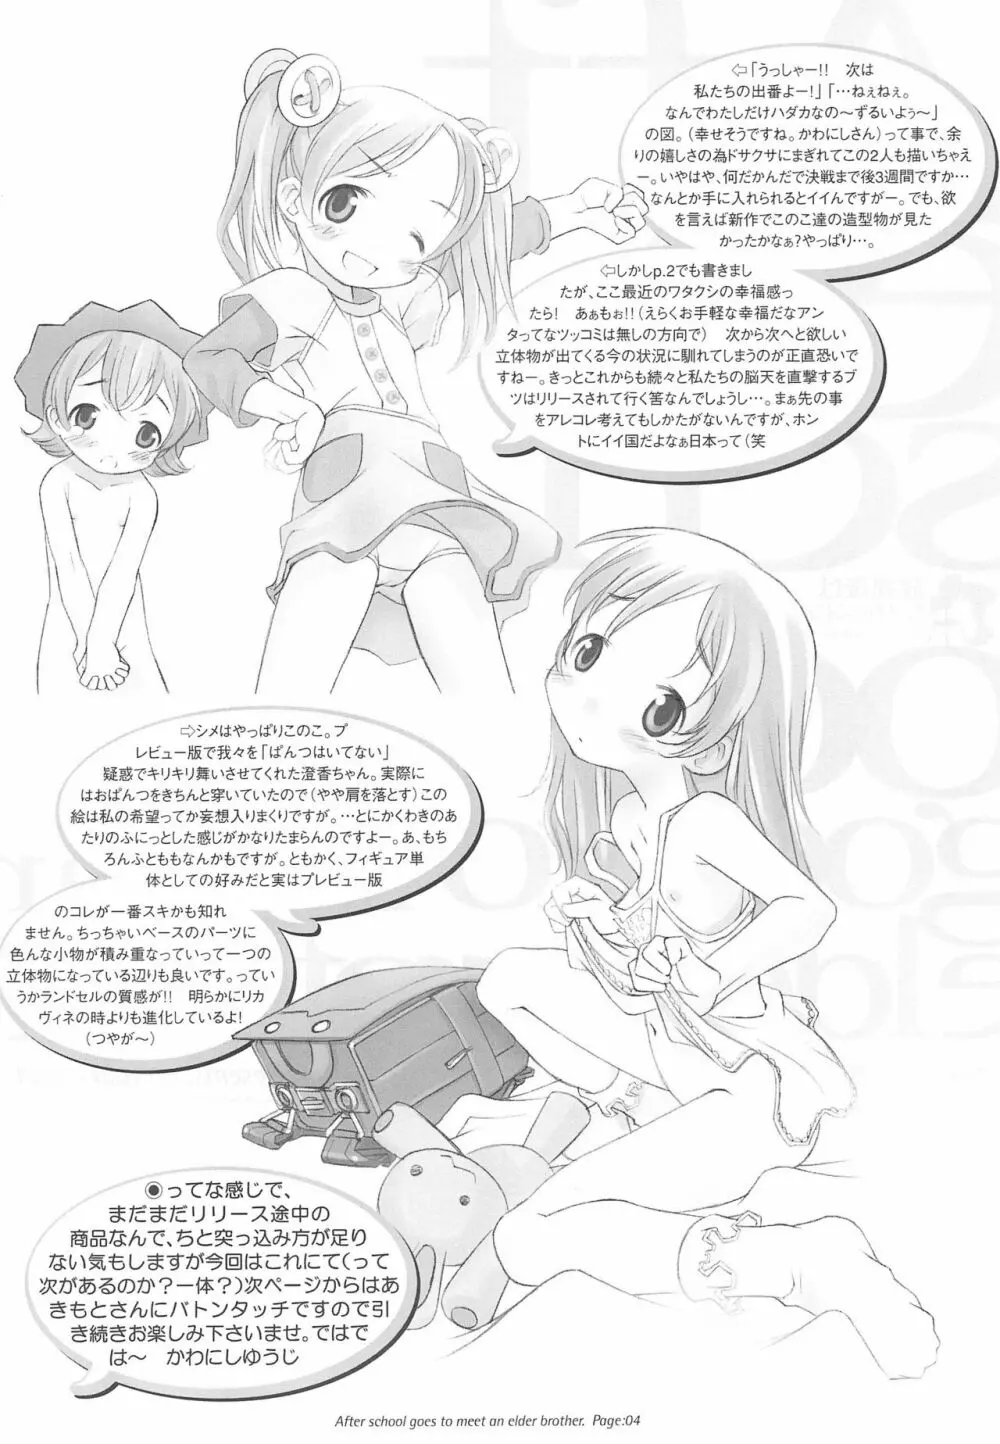 After School Goes To Meet An Elder Brother 放課後はお兄ちゃんに逢いに行きます。 Page.4